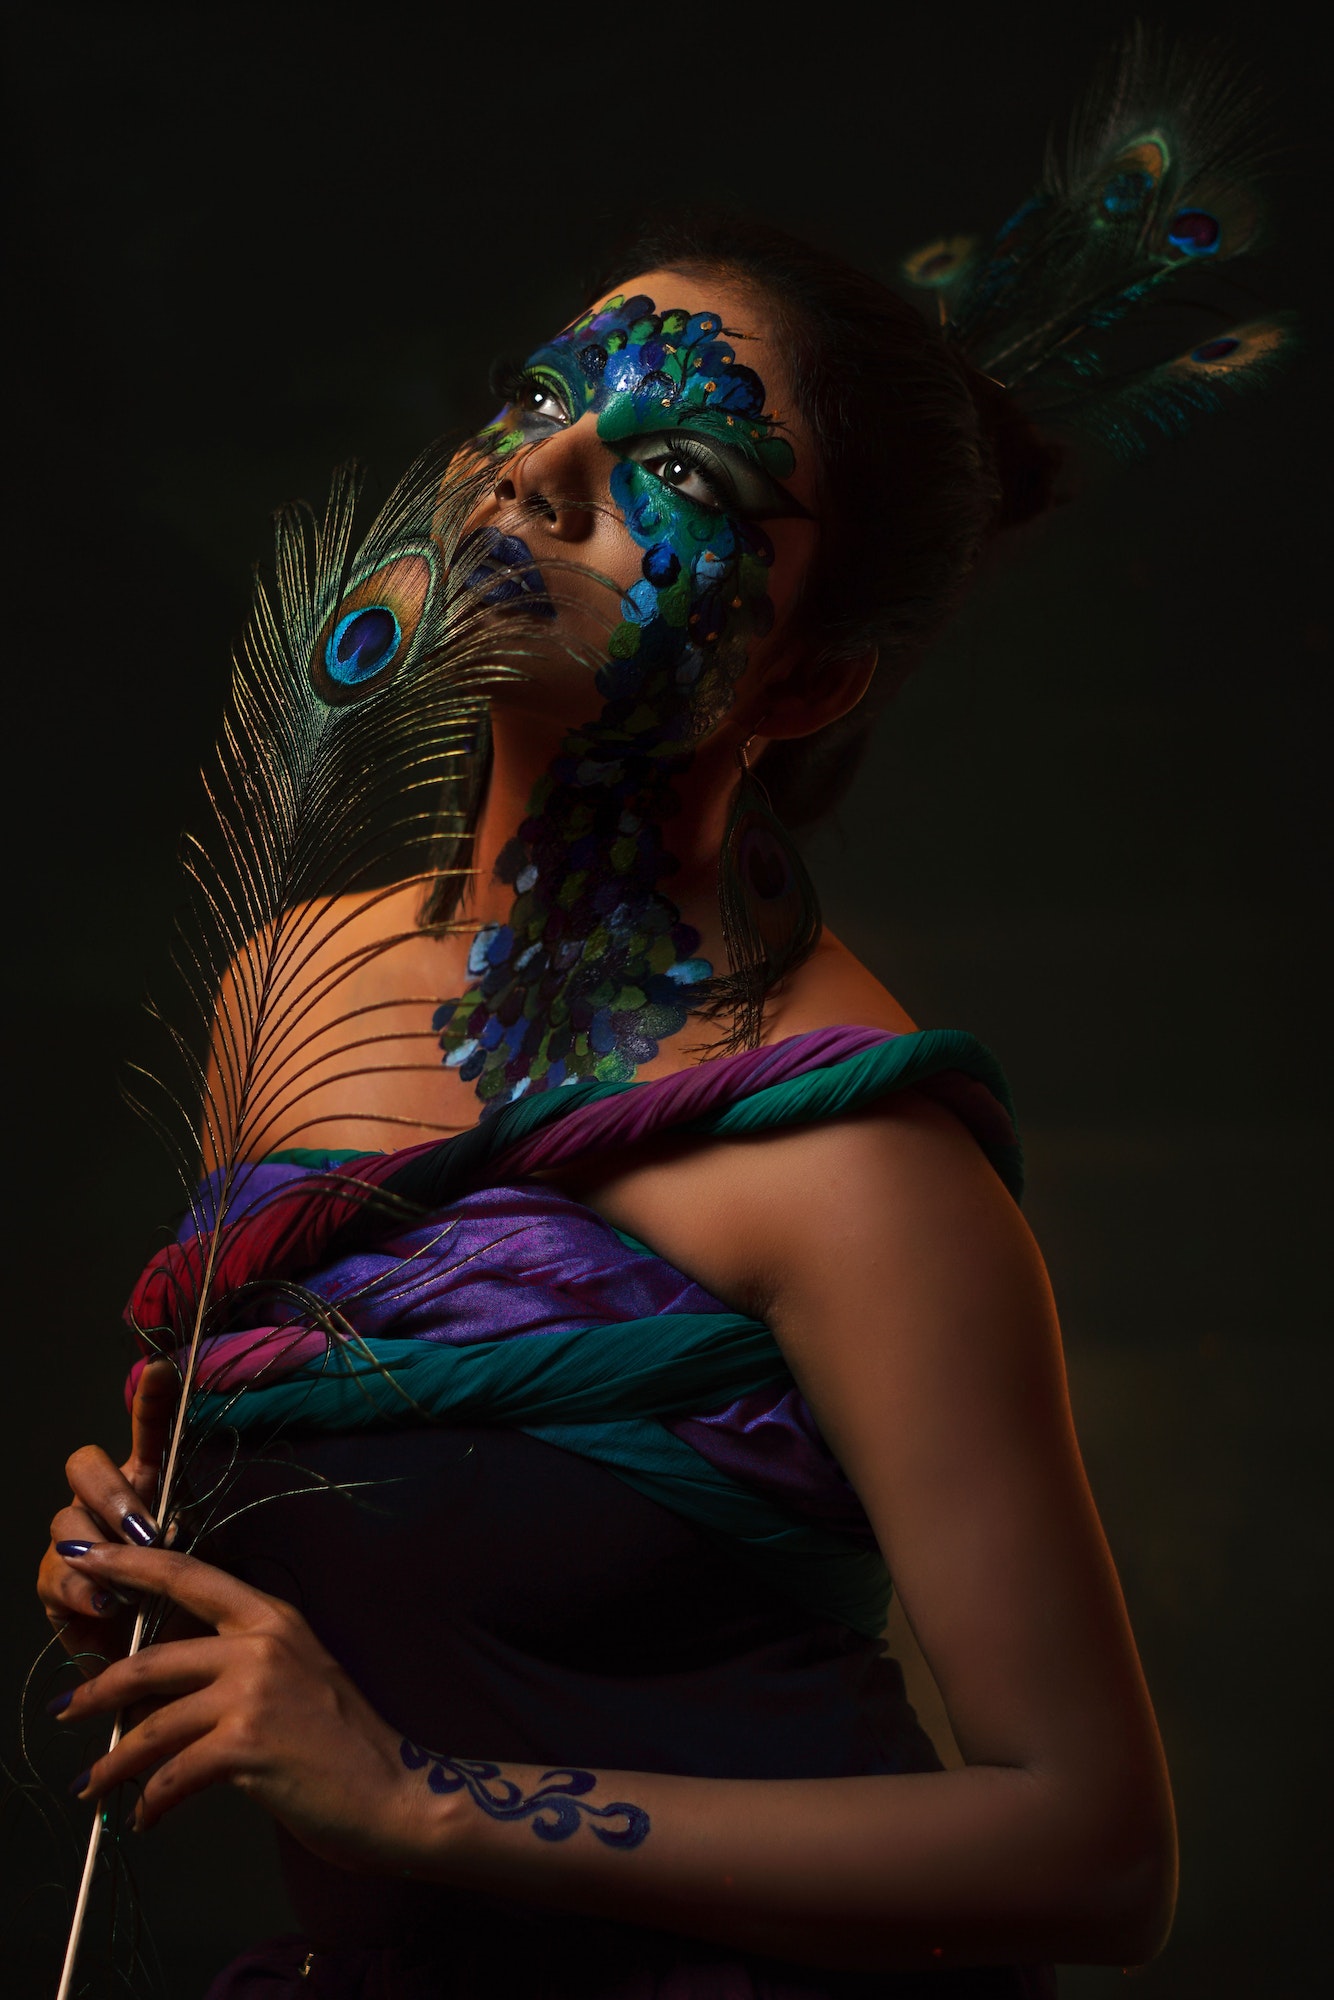 Southeast Asian young female with peacock style face painting and cloths on a black background